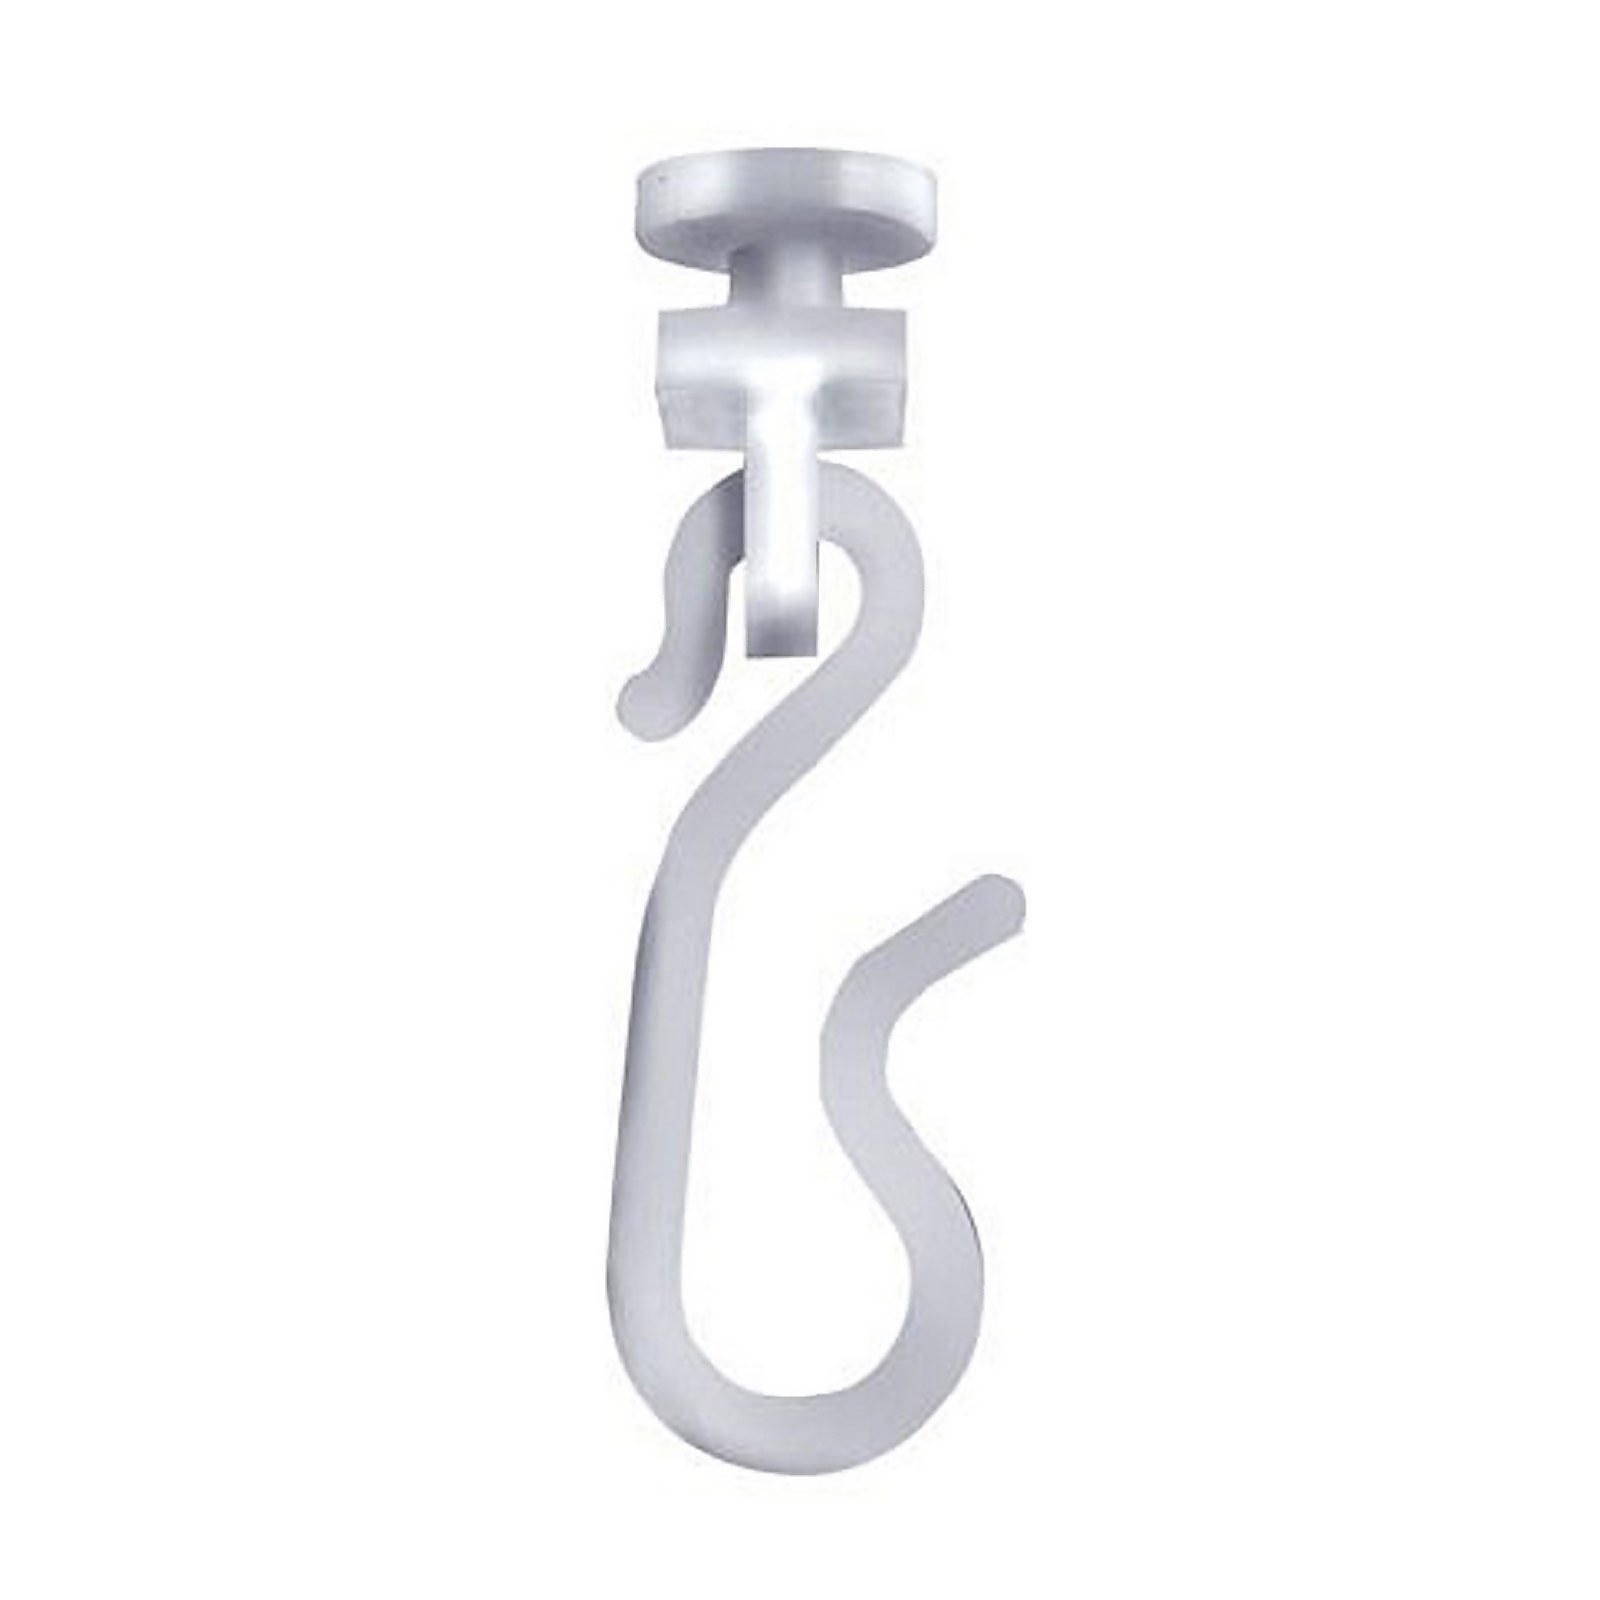 Photo of Croydex Shower Curtail Rail Hook Gliders - 12 Pack